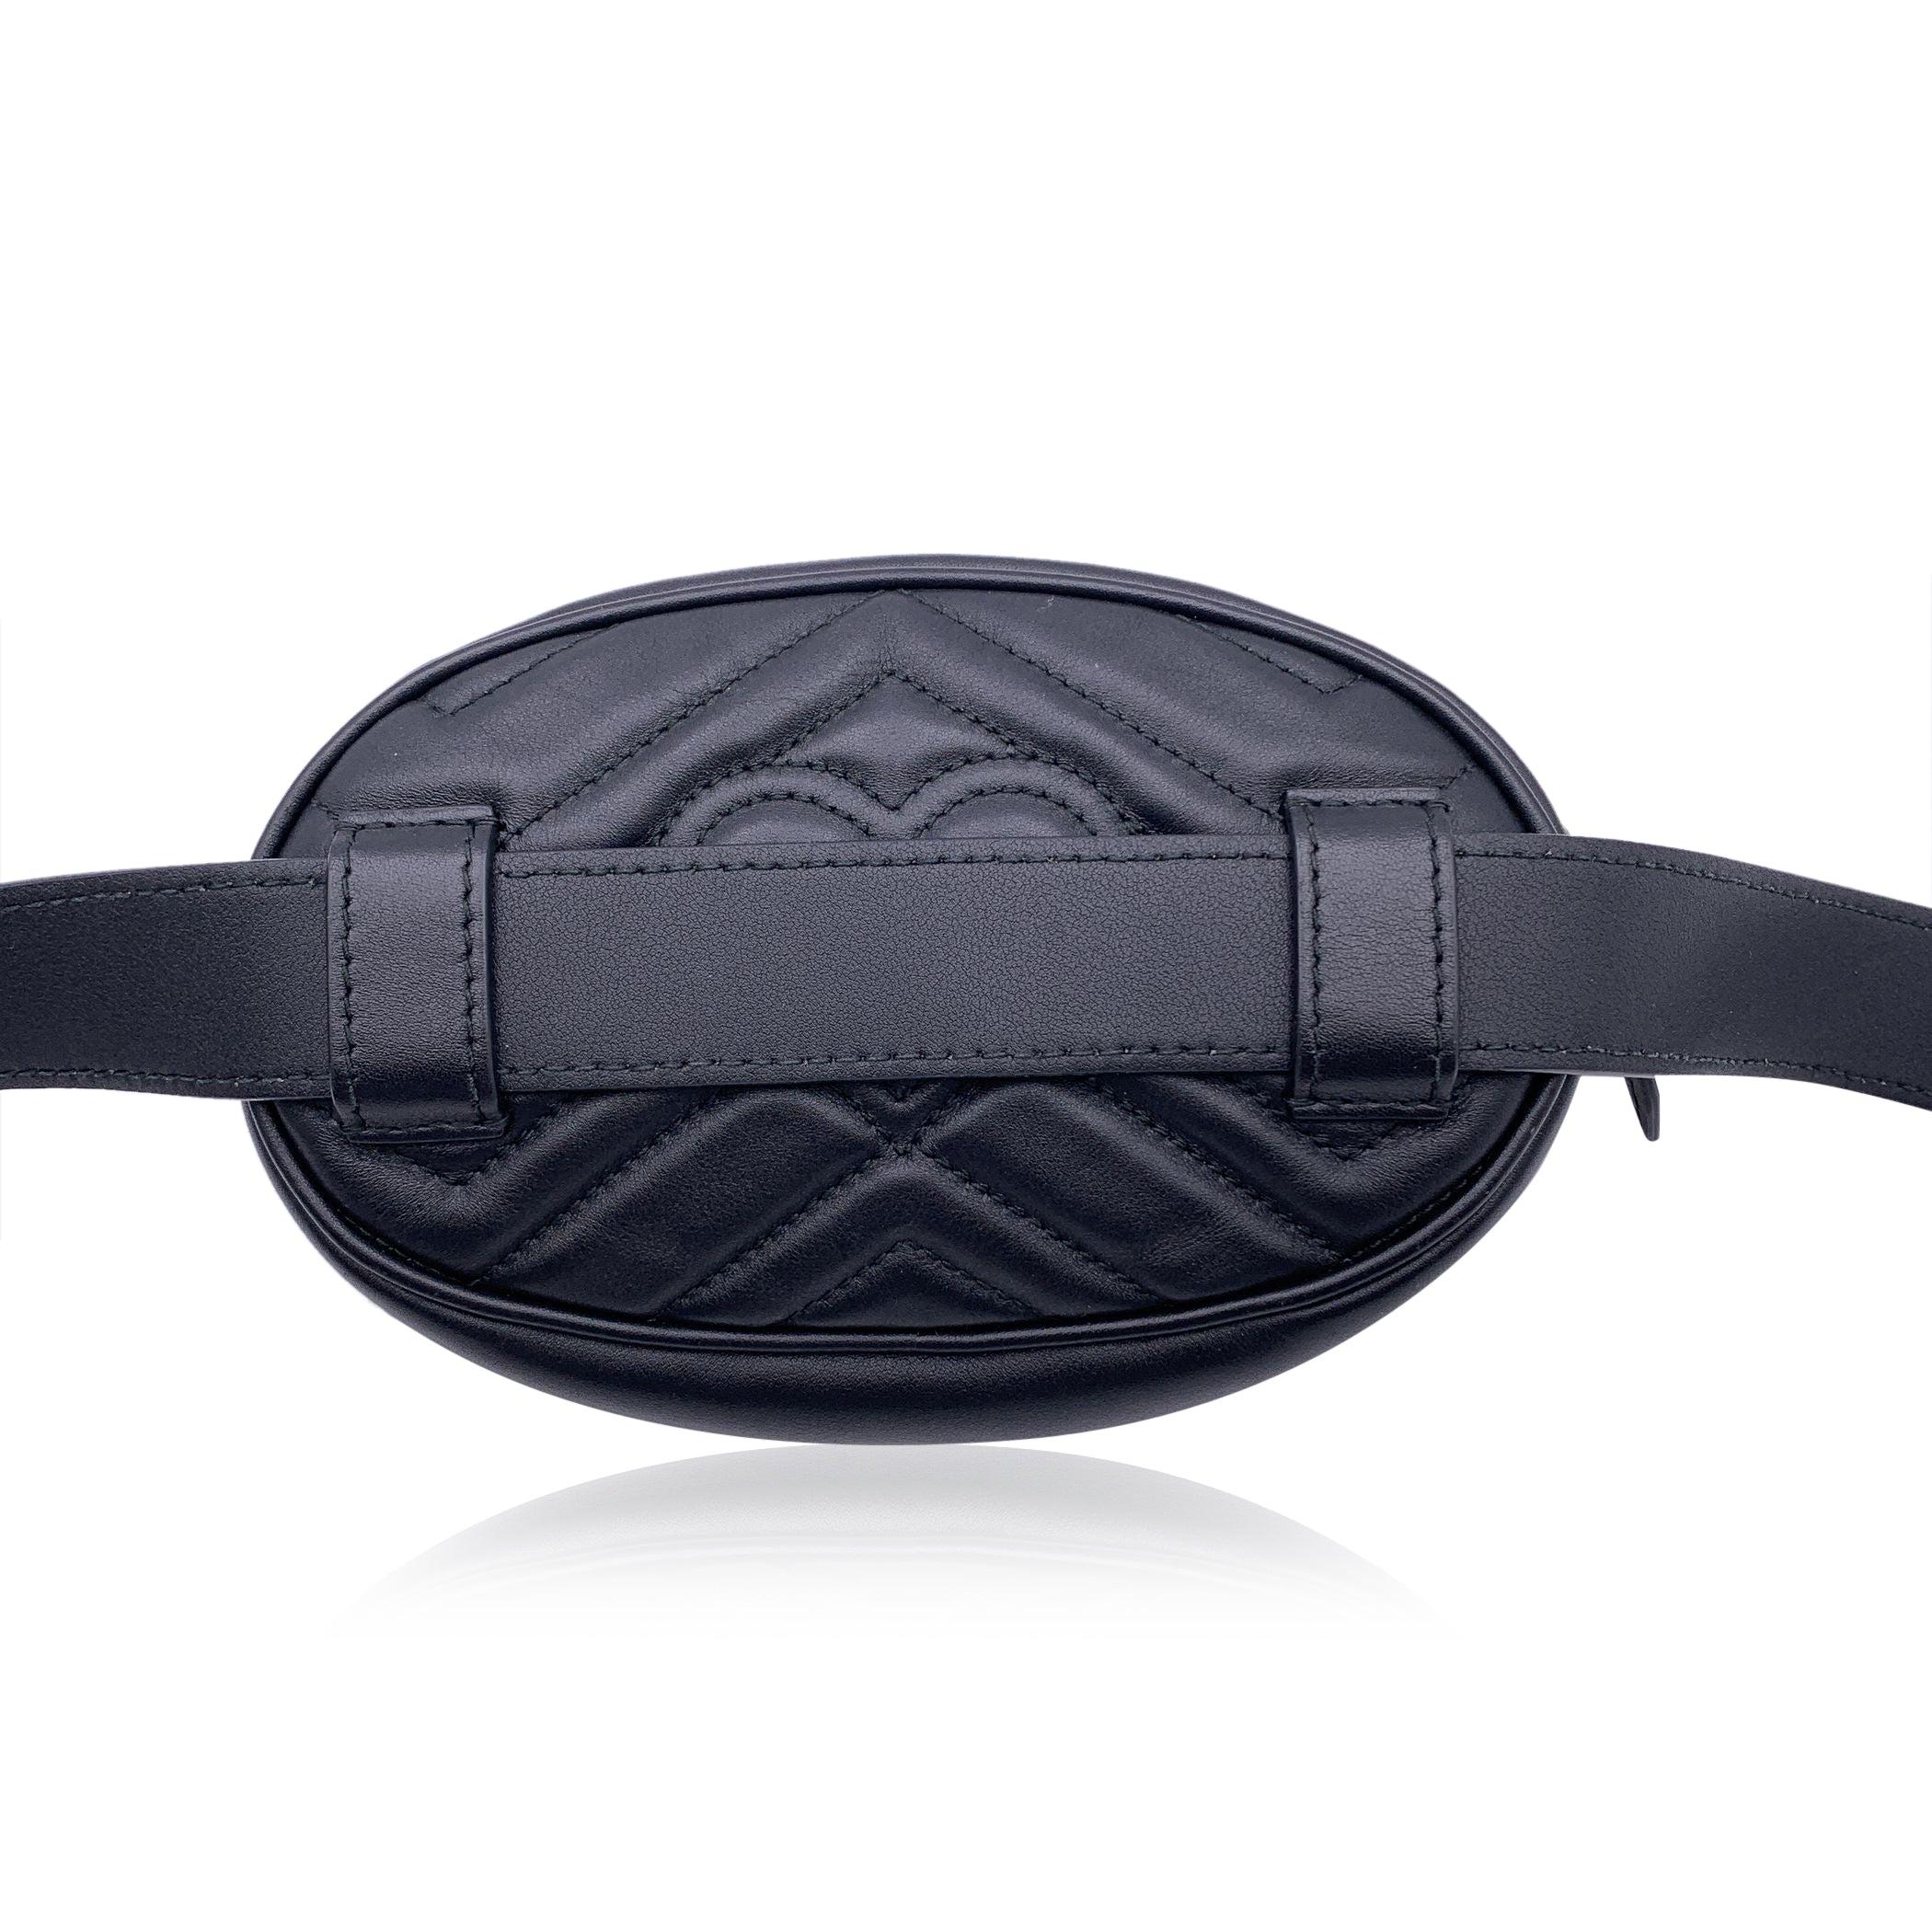 Gucci Black Quilted Leather Marmont GG Belt Waist Bag Size 65/26 In Excellent Condition In Rome, Rome